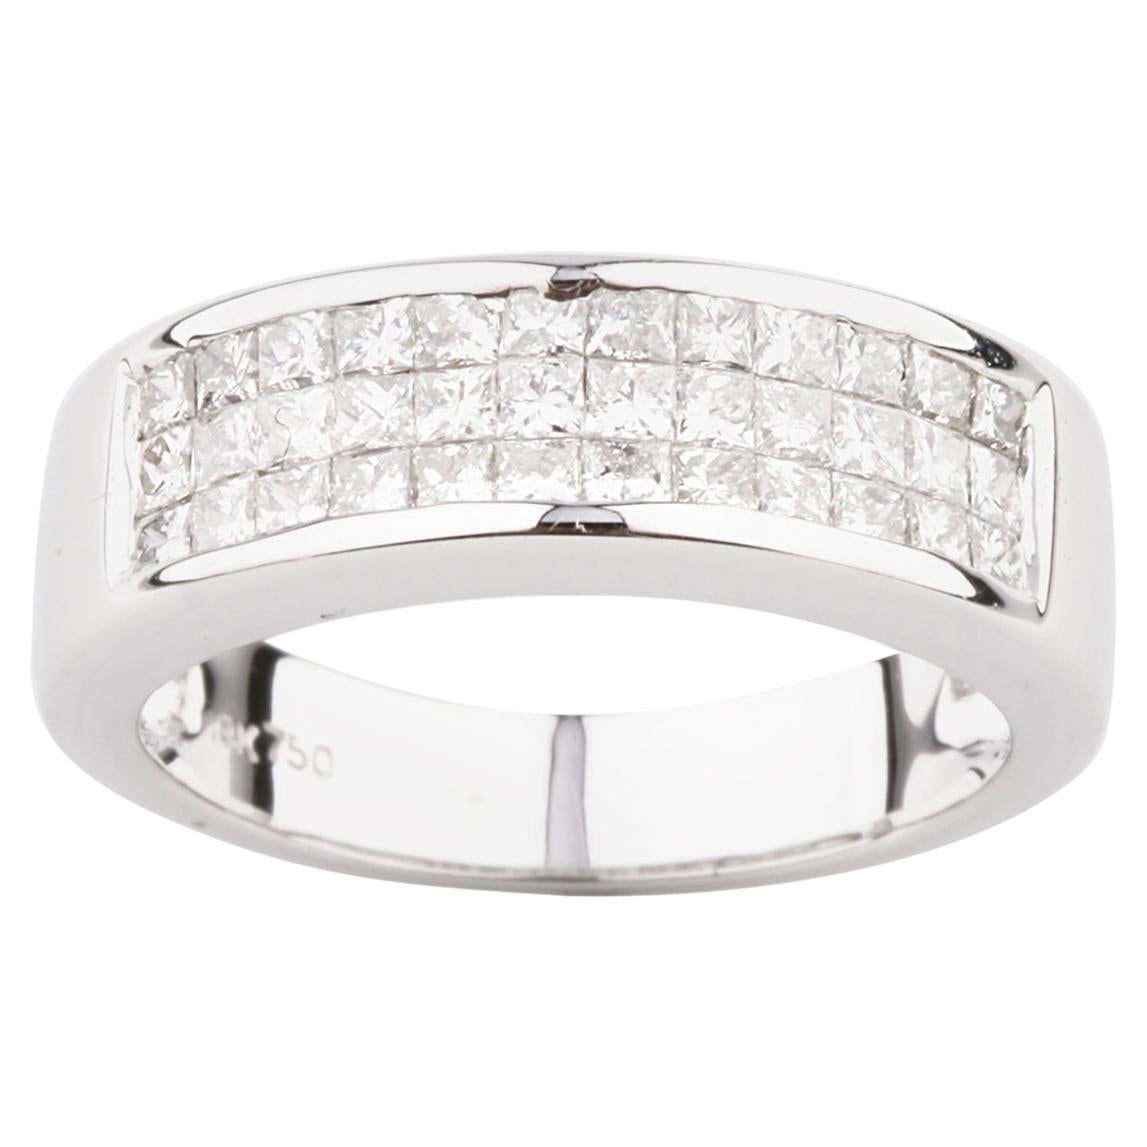 1.10 Carat Princess Diamond Plaque Band Ring in White Gold For Sale